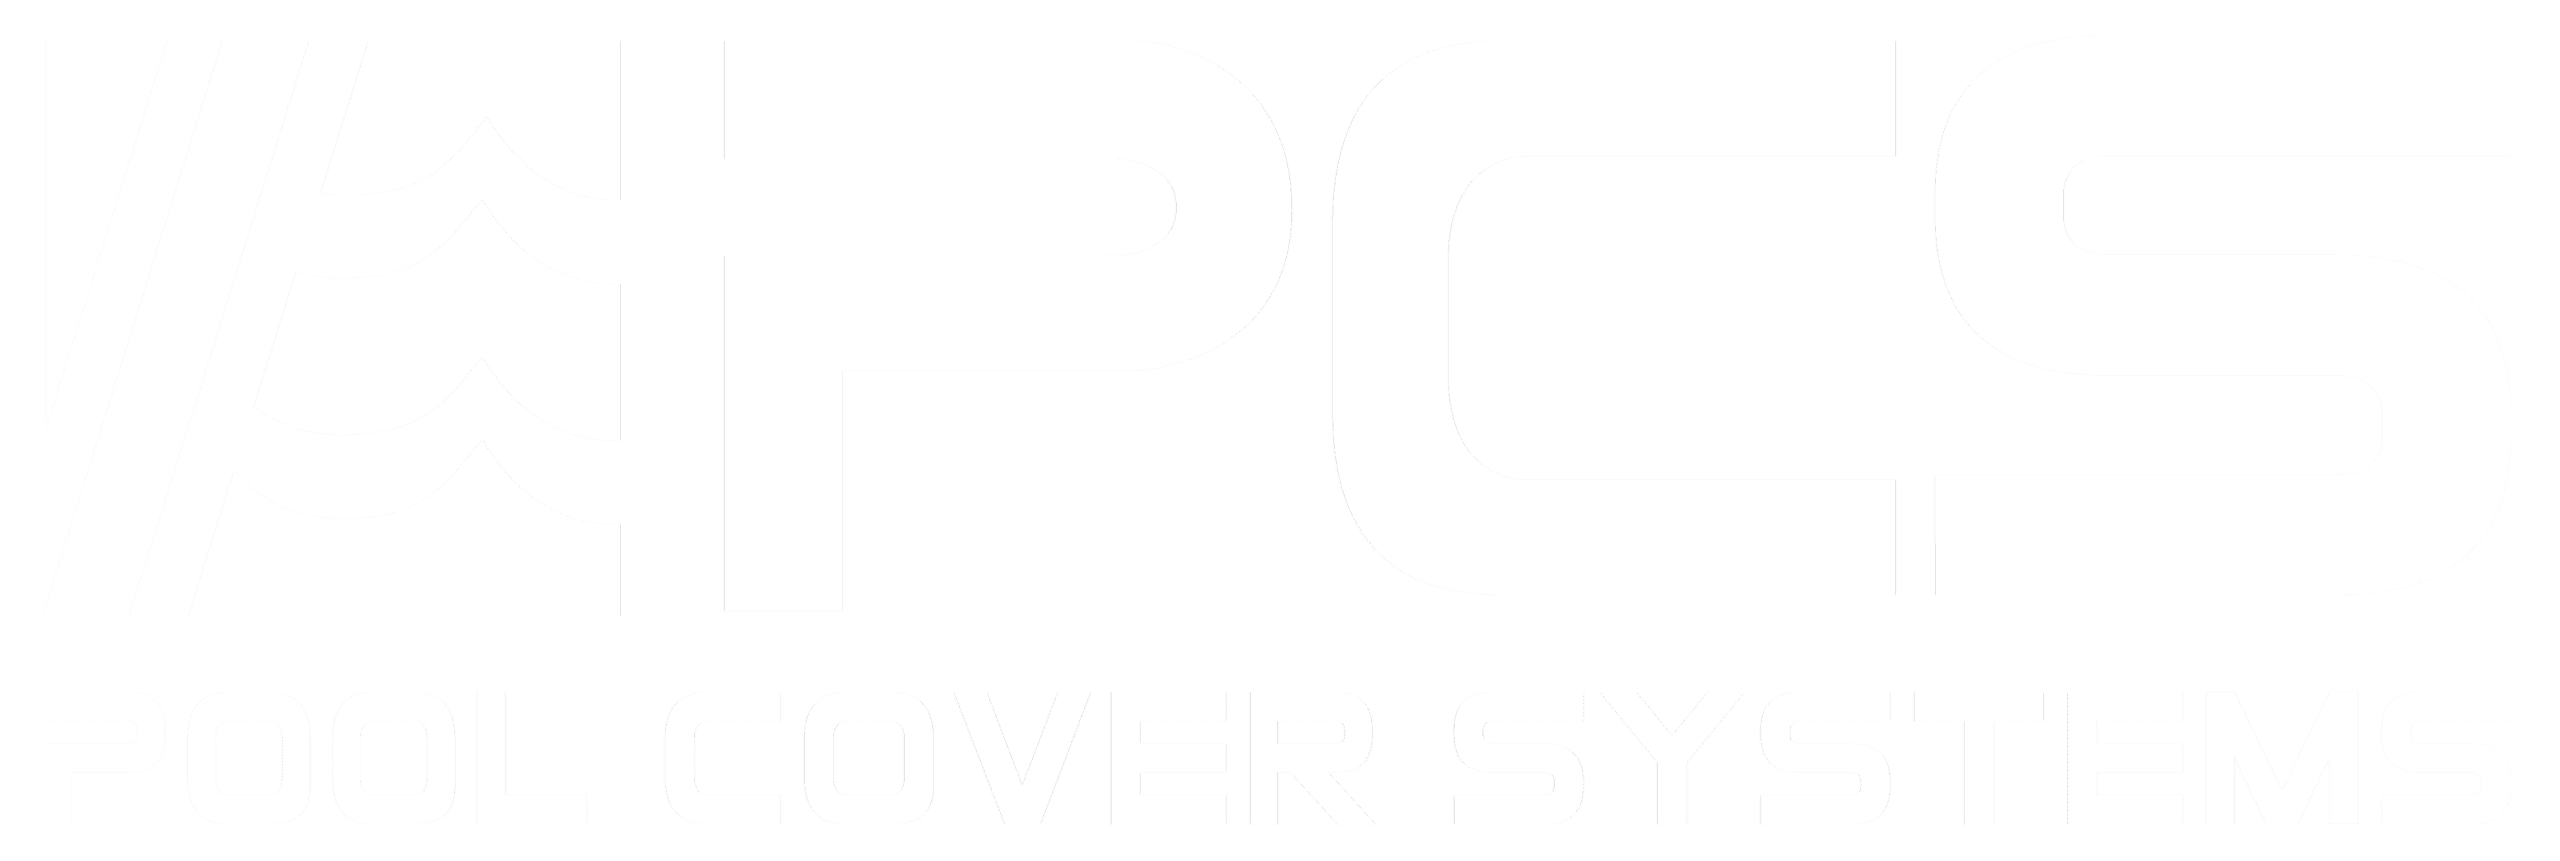 white pool cover systems logo